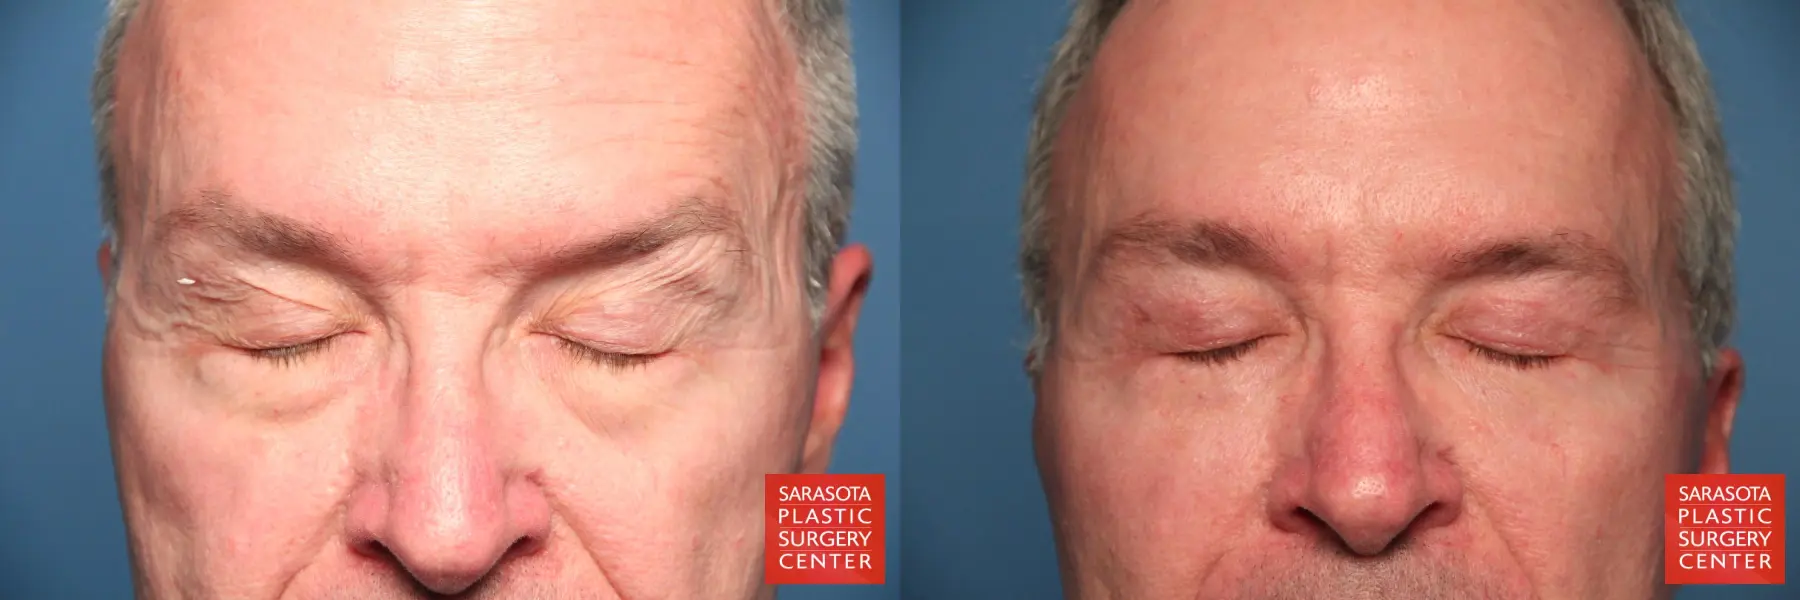 Eyelid Lift For Men Revision: Patient 1 - Before and After 3